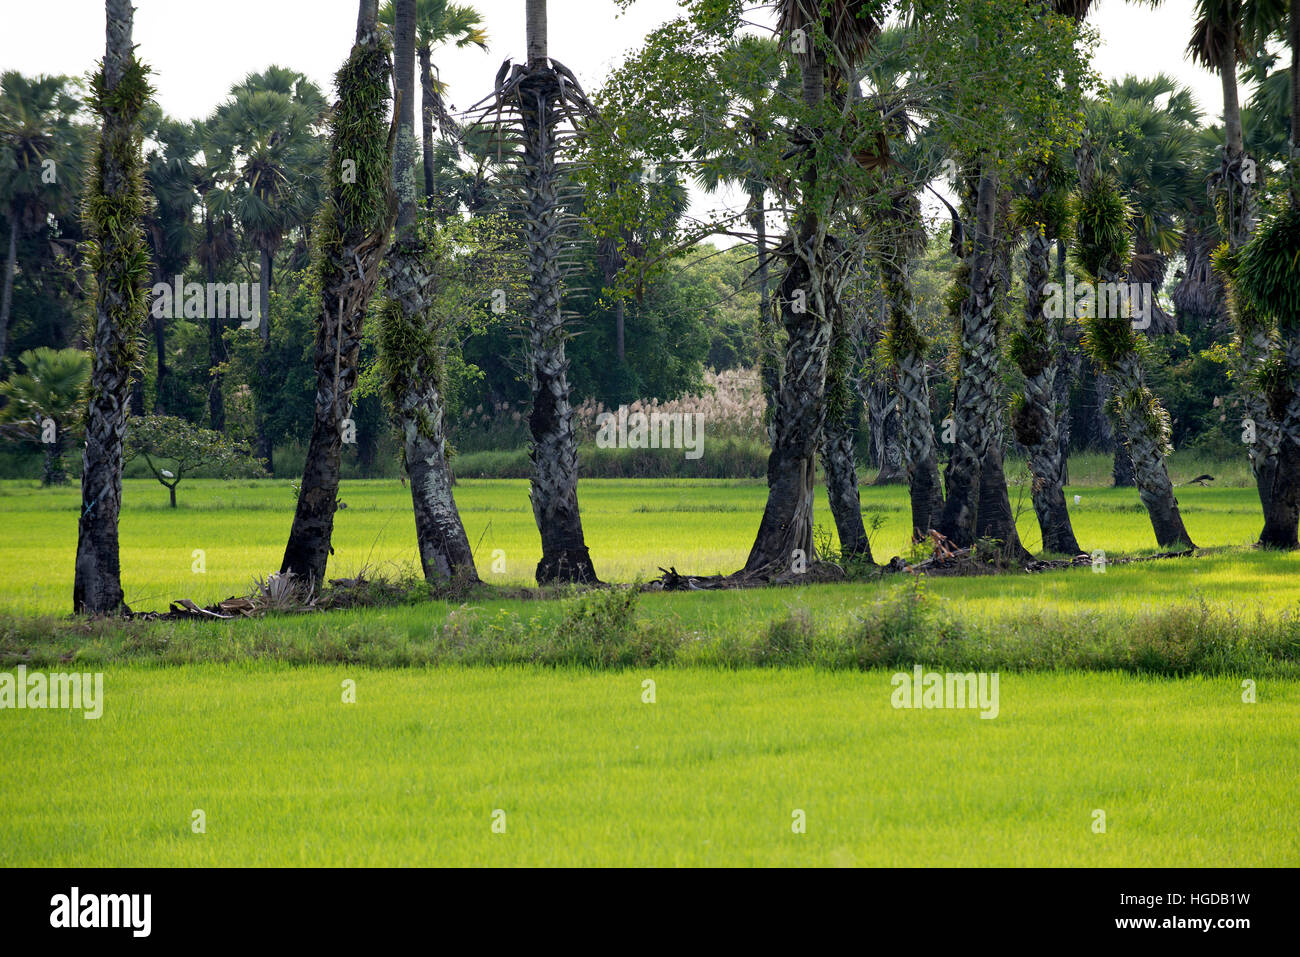 Thailand, Palm trees in the midden of rice paddies Stock Photo